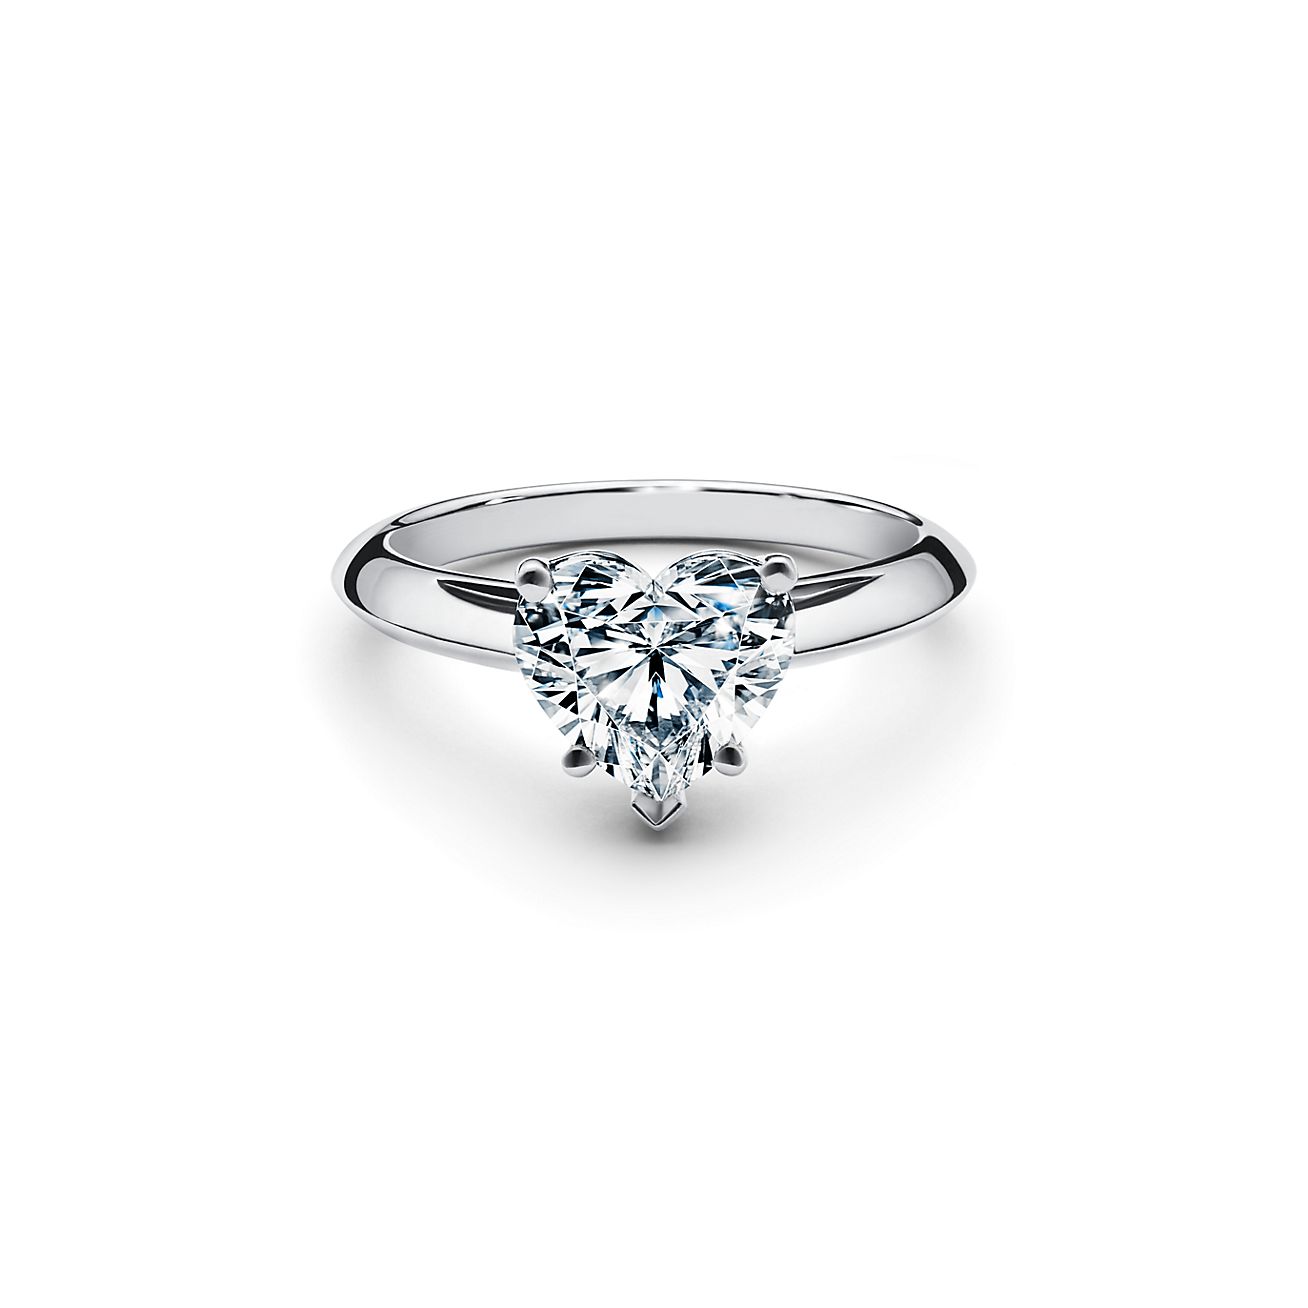 how much is a tiffany's engagement ring